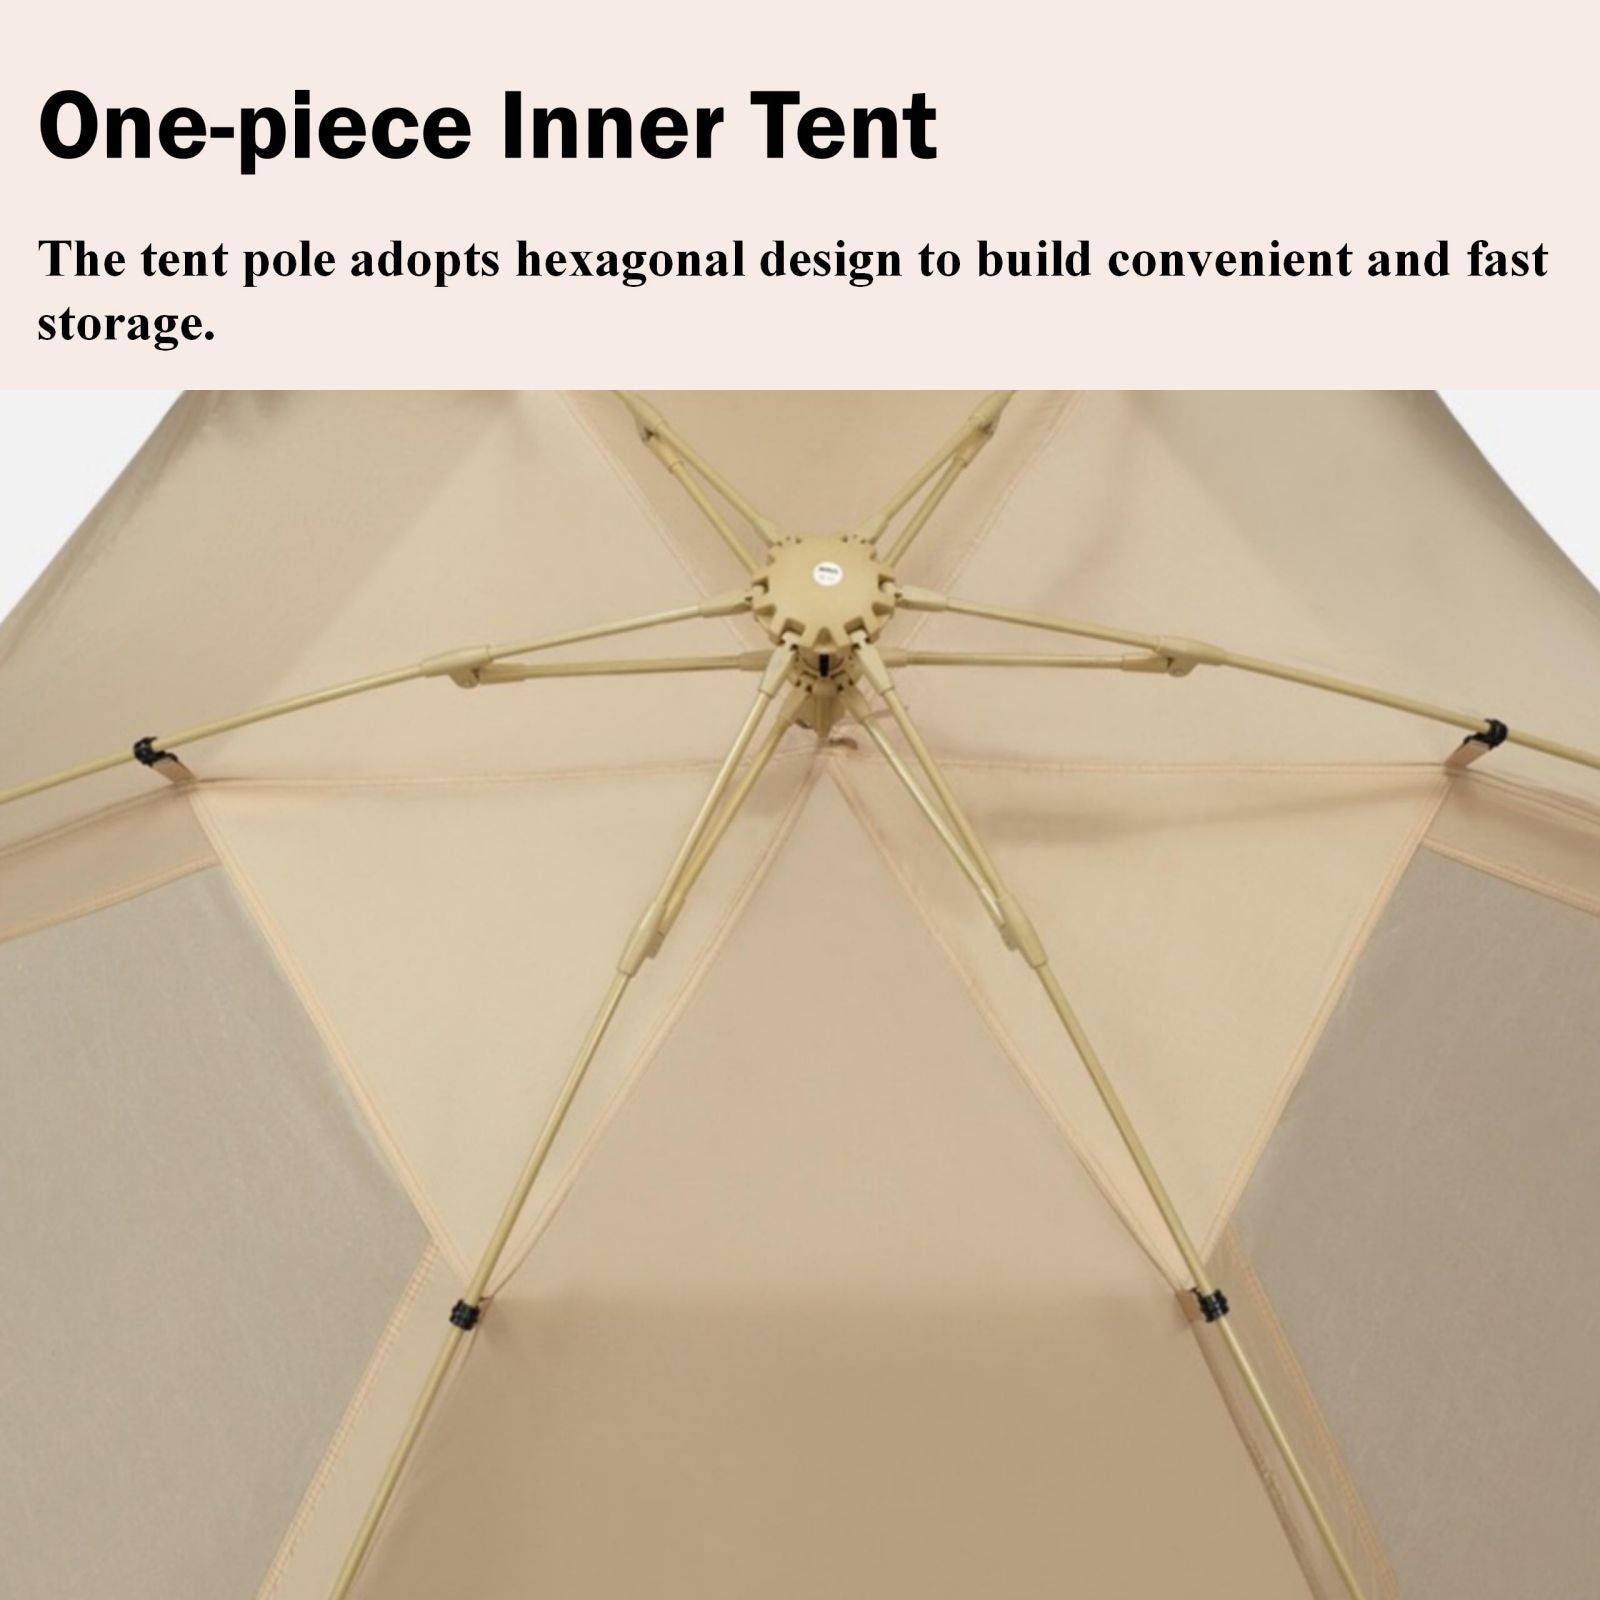 Large Space Luxury Frog Hexagonal Tent 5-8 Person Double Layer - Green - SILBERSHELL